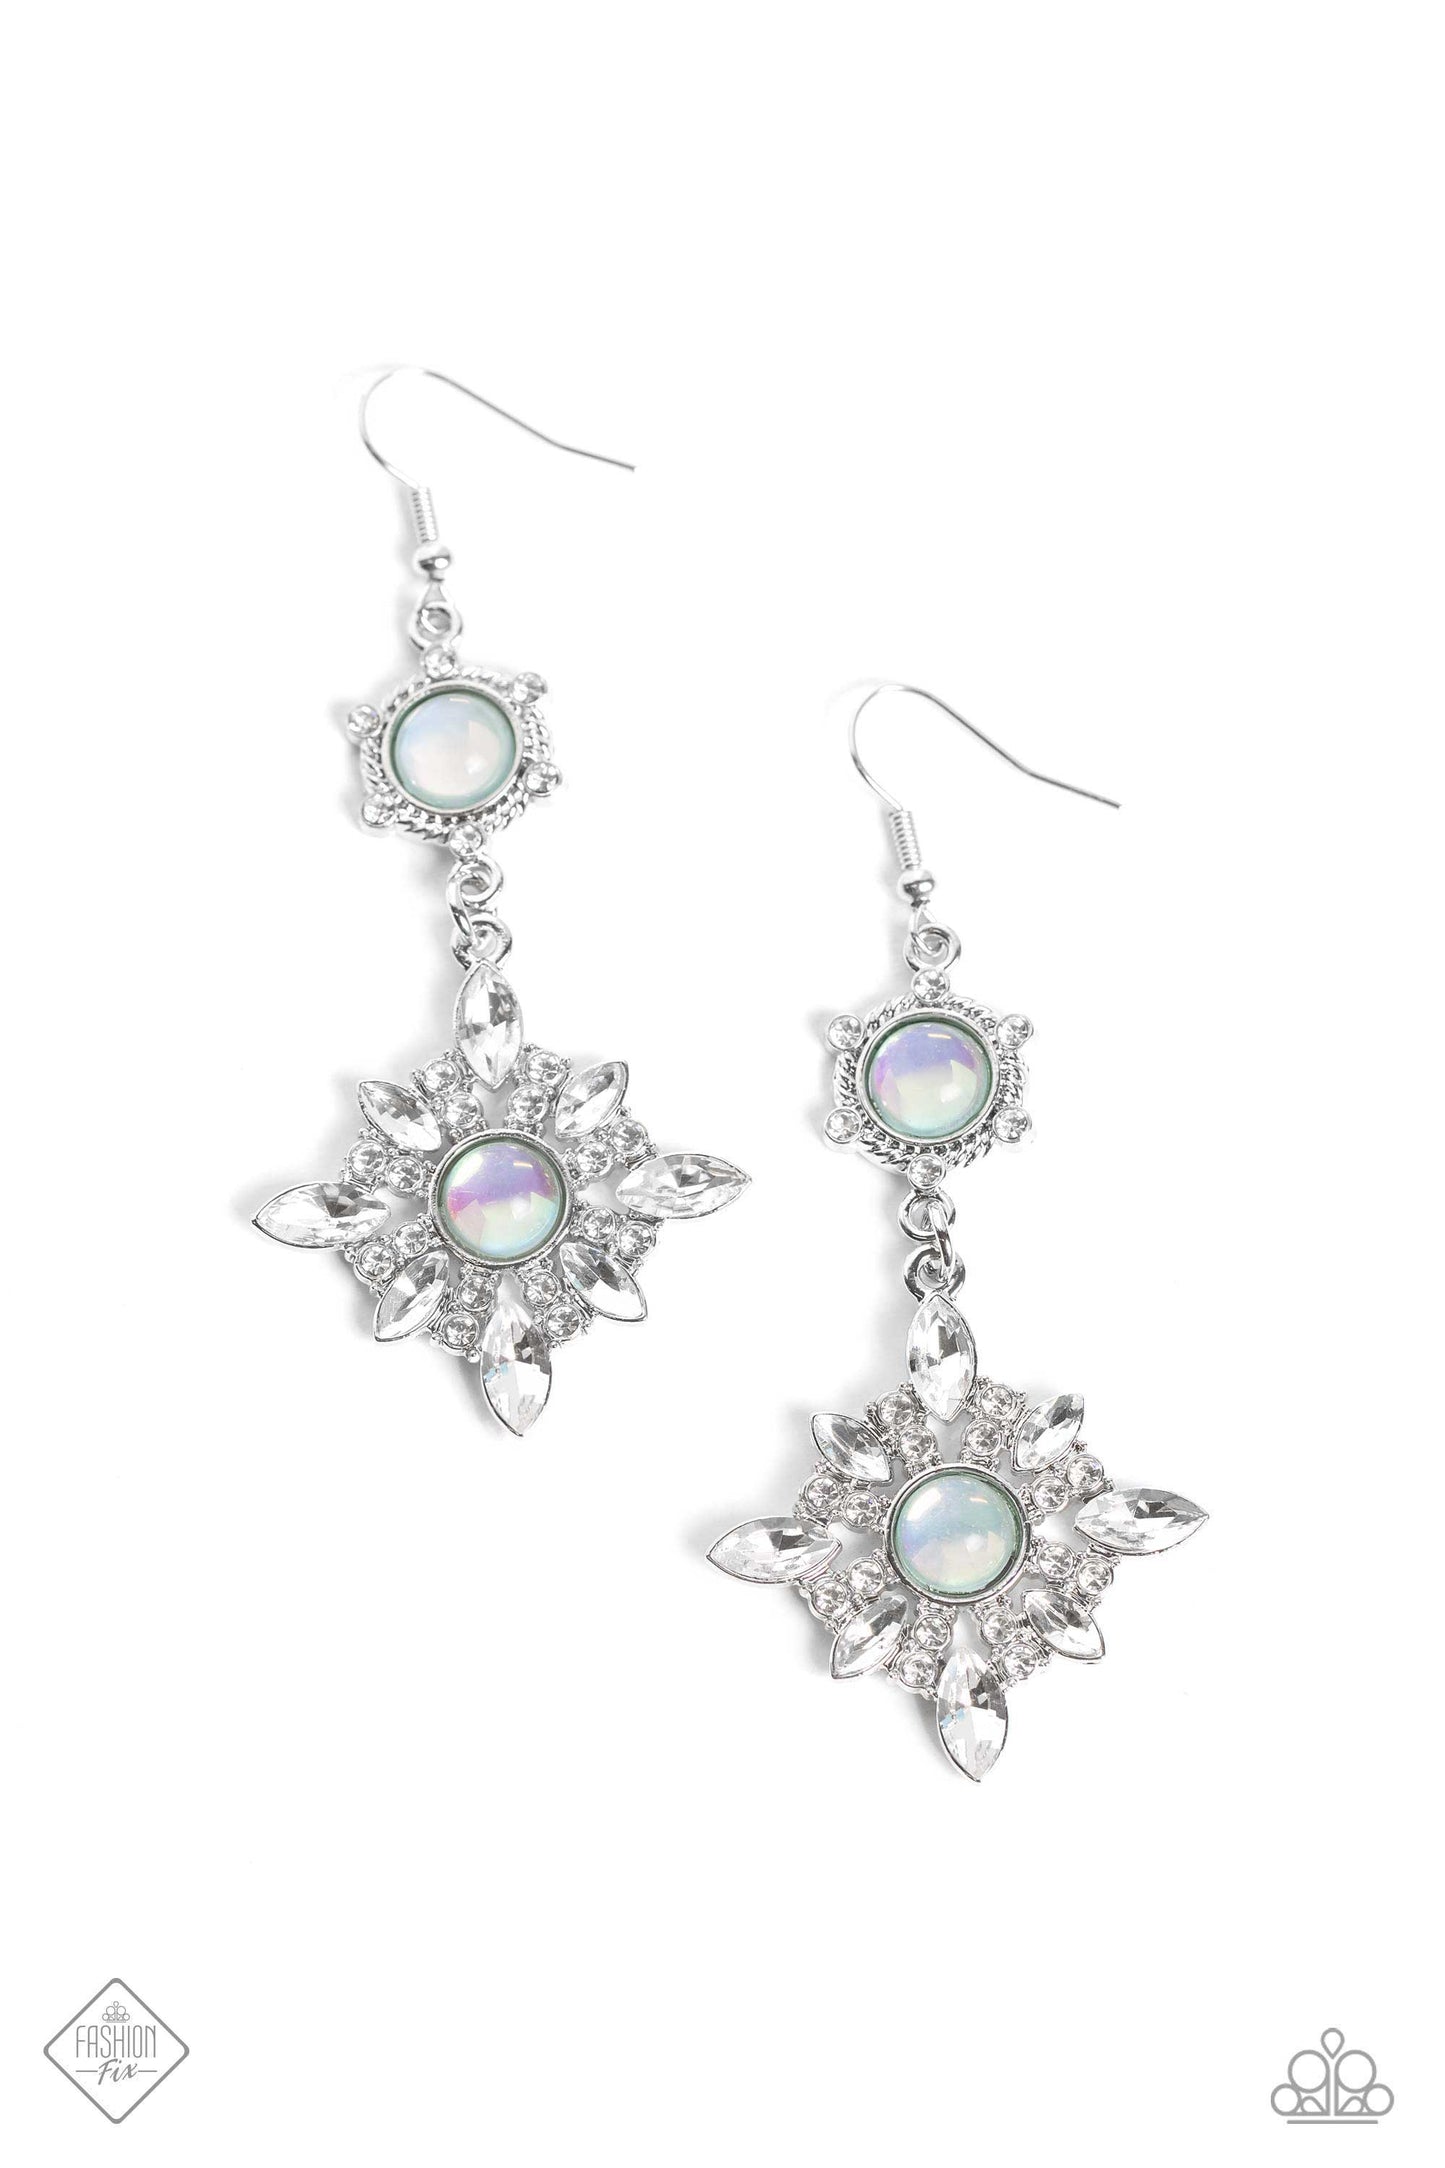 Summer DAZE - Green and Silver Earrings - Paparazzi Accessories - A spiral-textured silver frame featuring dainty white rhinestone accents and a glassy opalescent green bead center anchors a dazzling floral frame. The white marquise-cut gem petals and glassy opalescent center are accented by stacked white rhinestones, highlighting the handcrafted features and sheen of the design.